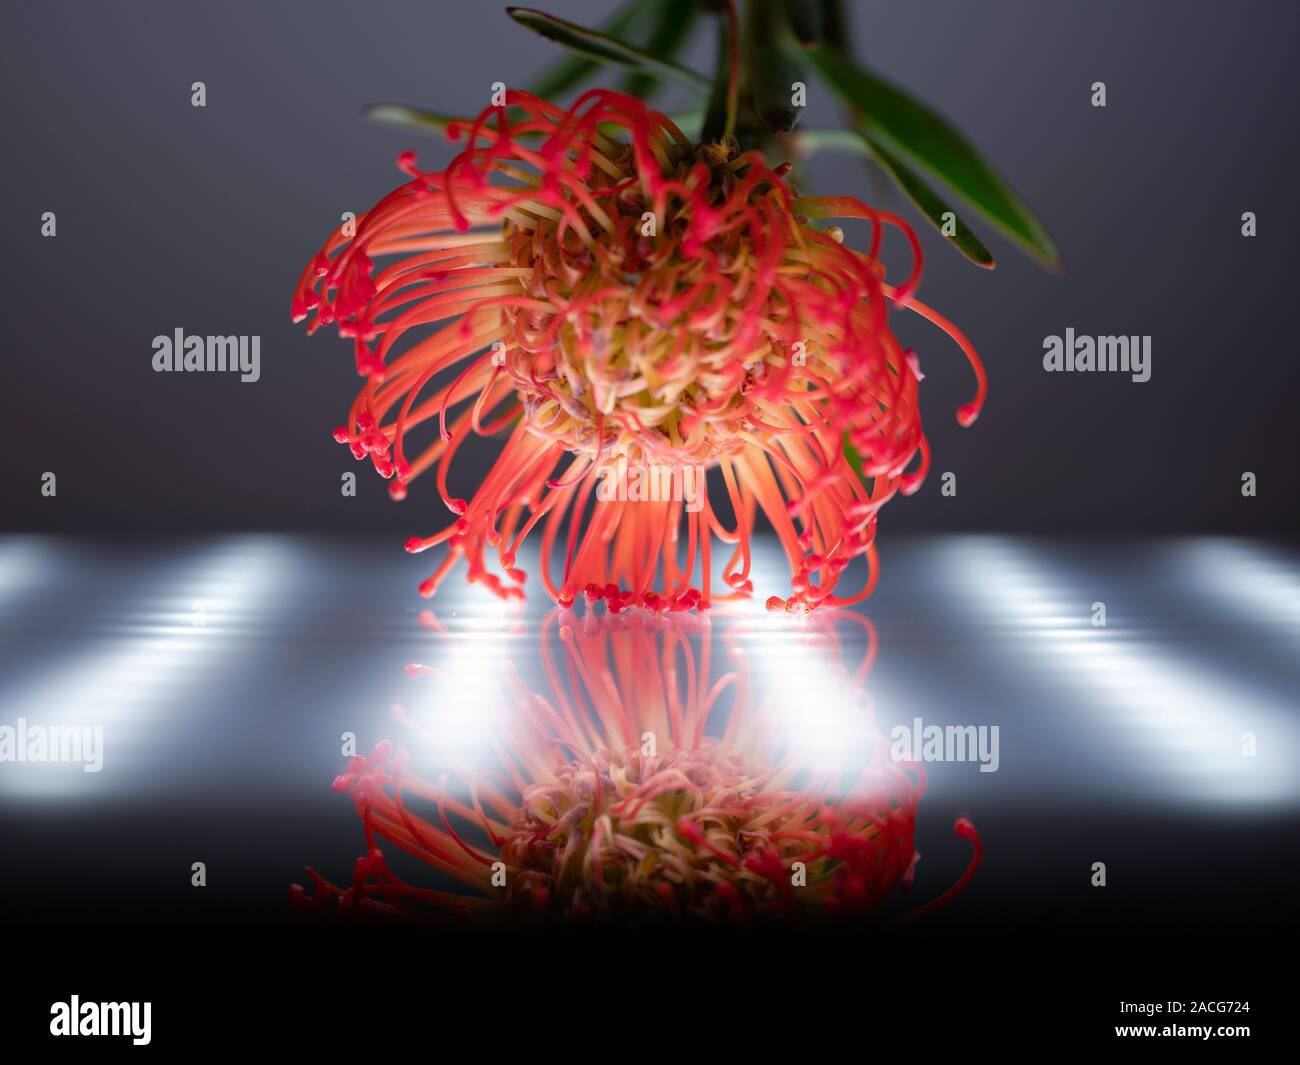 Reflection of a tropical flower against an LED light Stock Photo